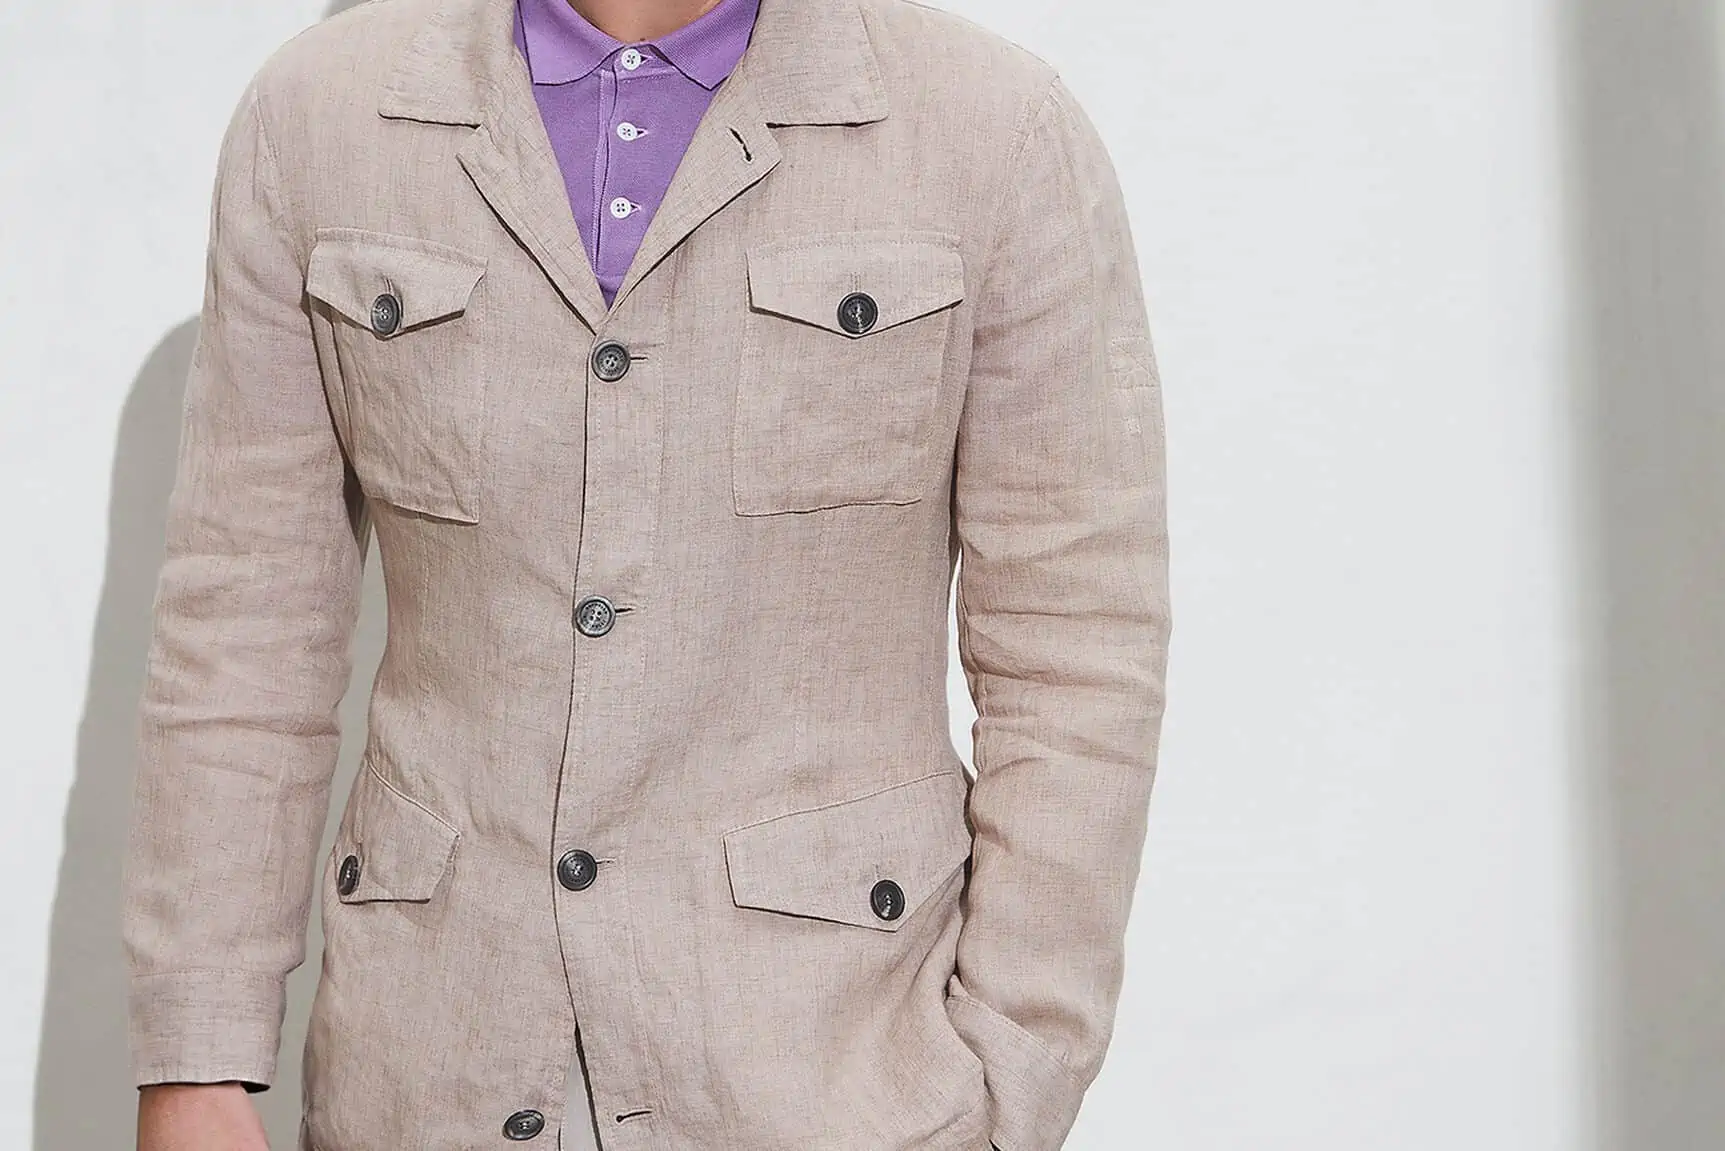 A field jacket and Cucinelli safari jacket. Notice that the bottom pockets are flap but not patch pockets while the top pockets are hybrid flapped patch pockets.